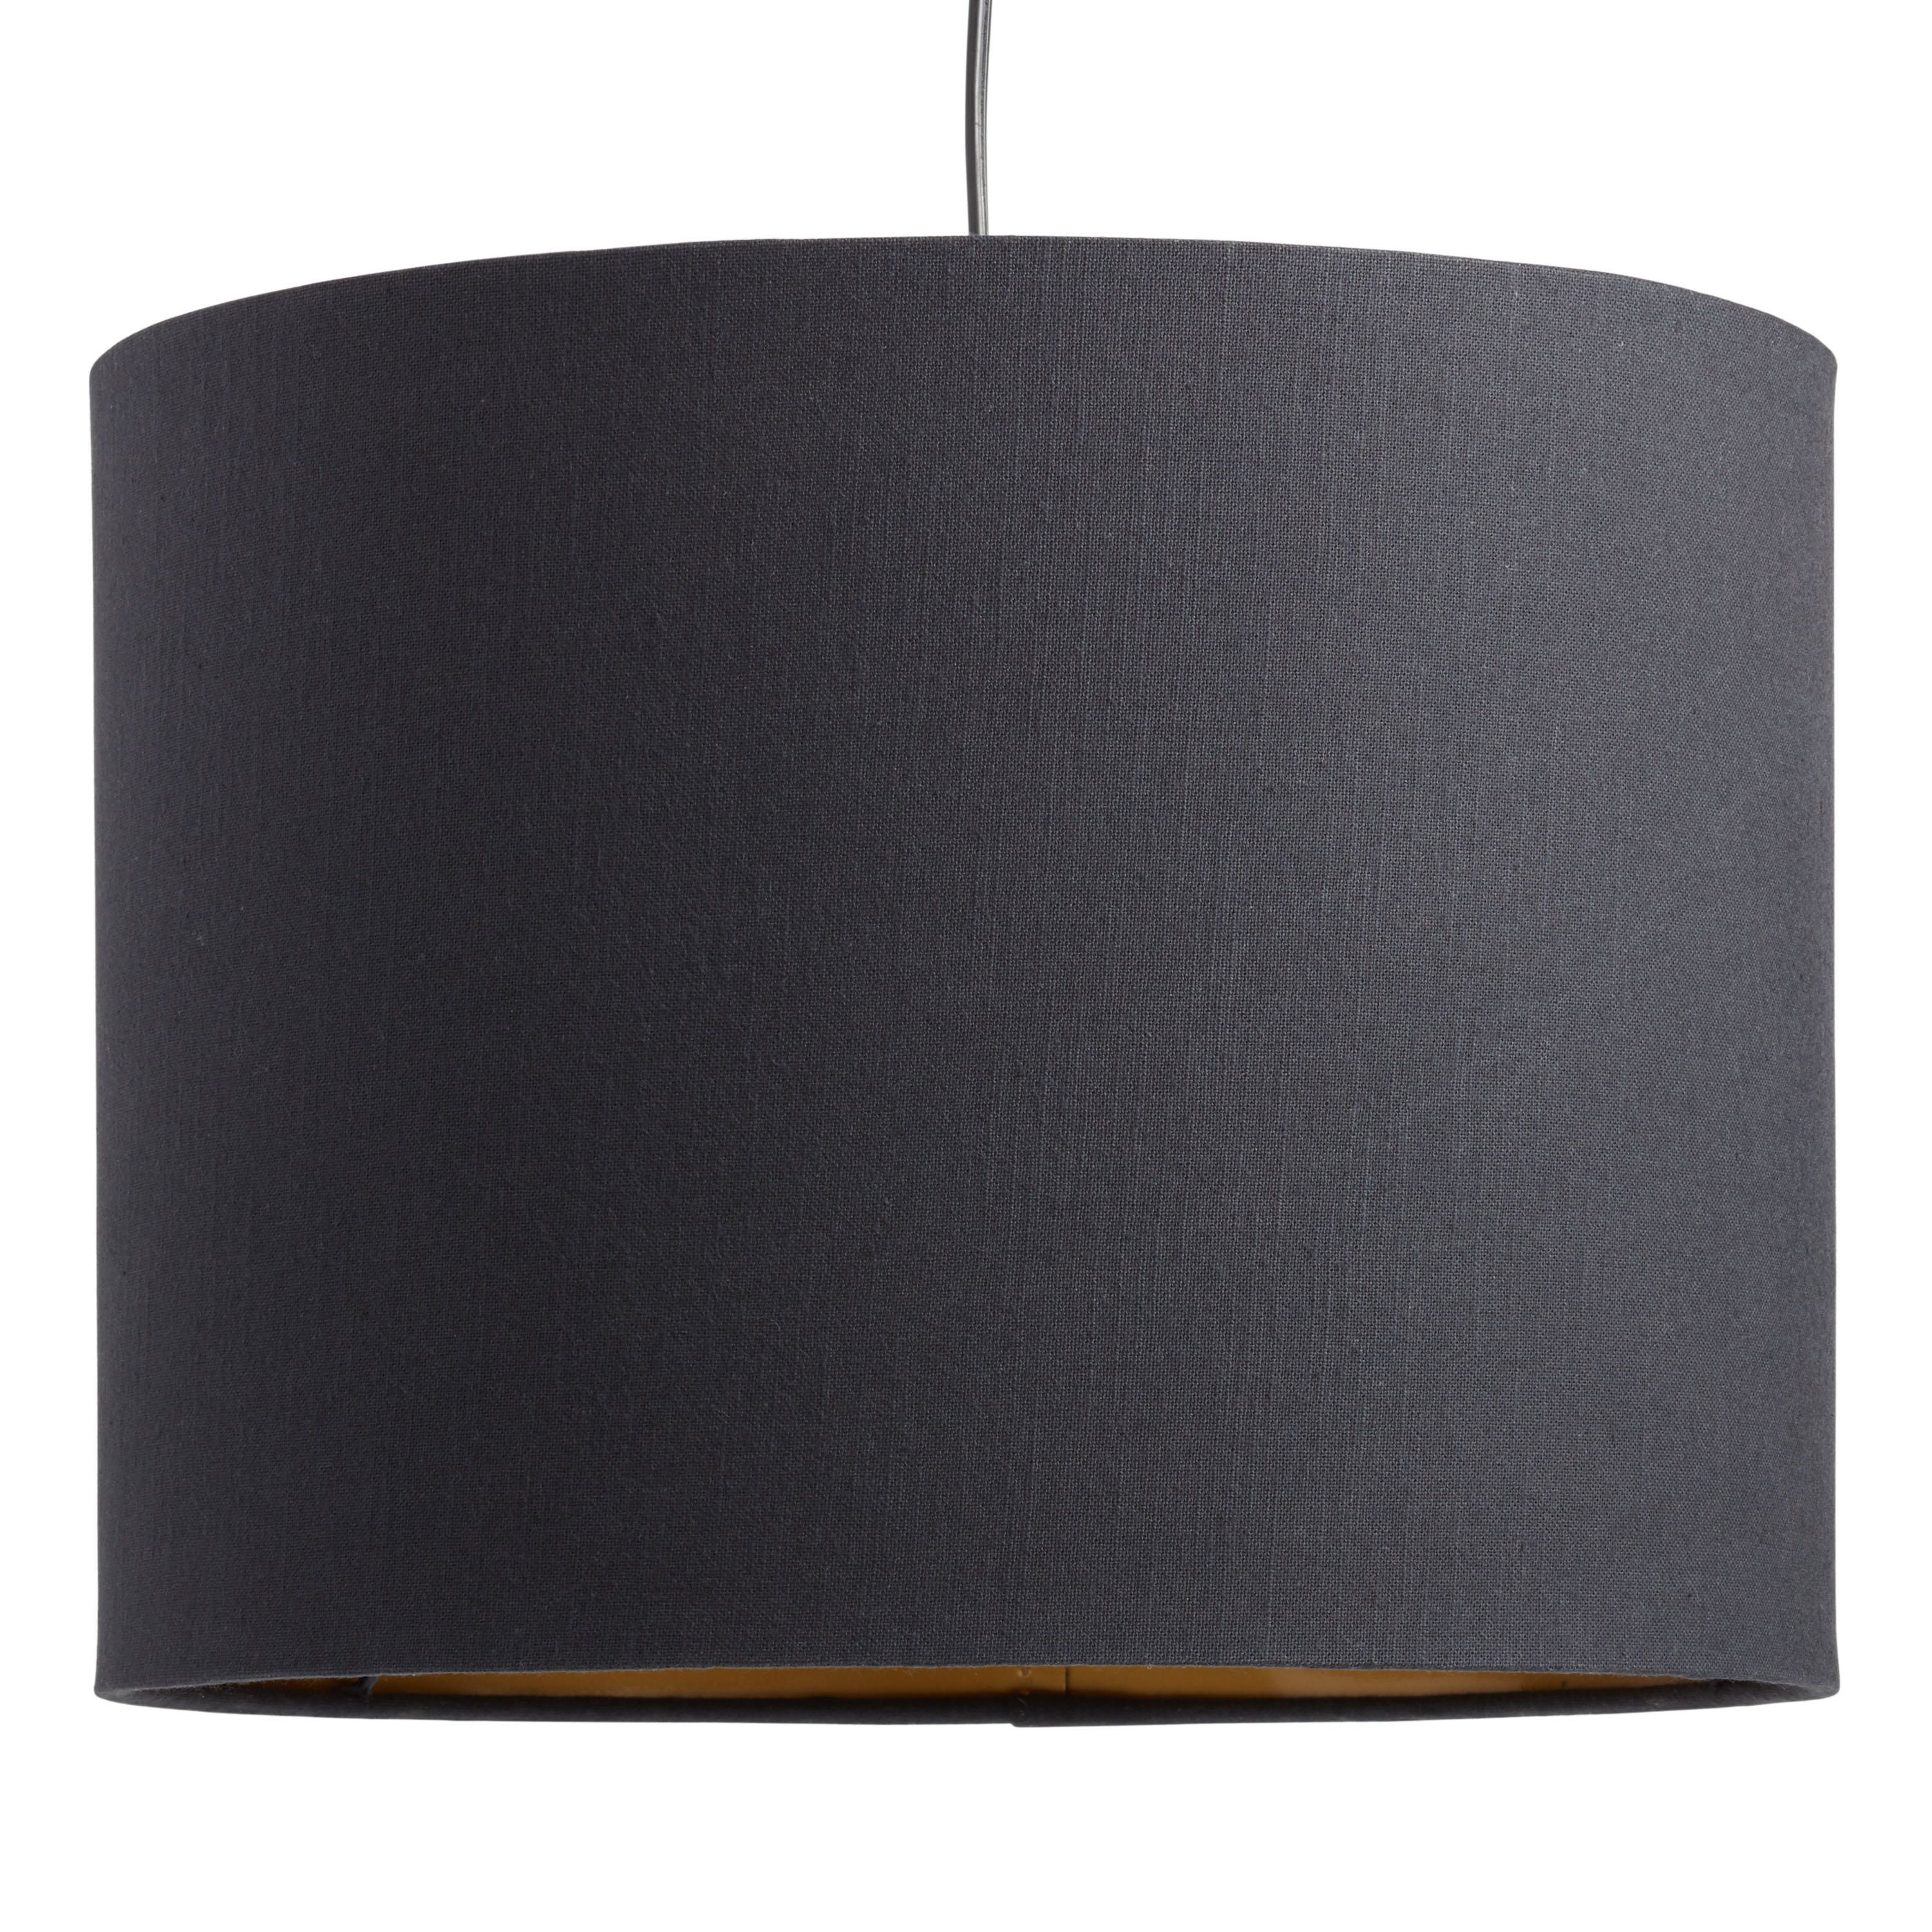 Black Linen Drum Table Lamp Shade with Gold Lining | World Market